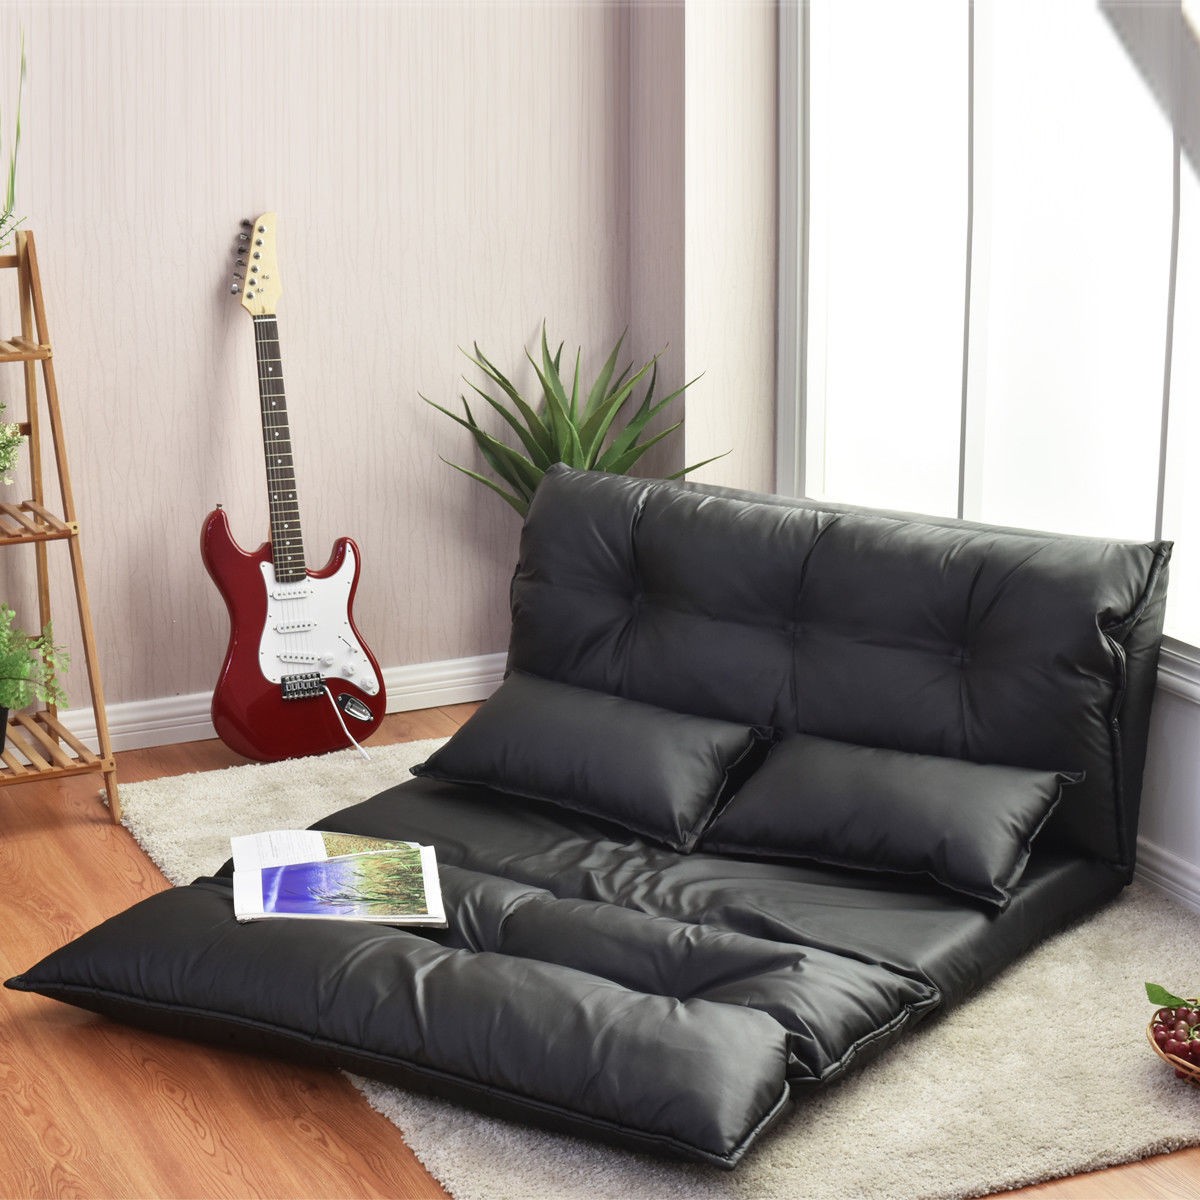 Foldable PU Leather Leisure Floor Sofa Bed W / 2 Pillows